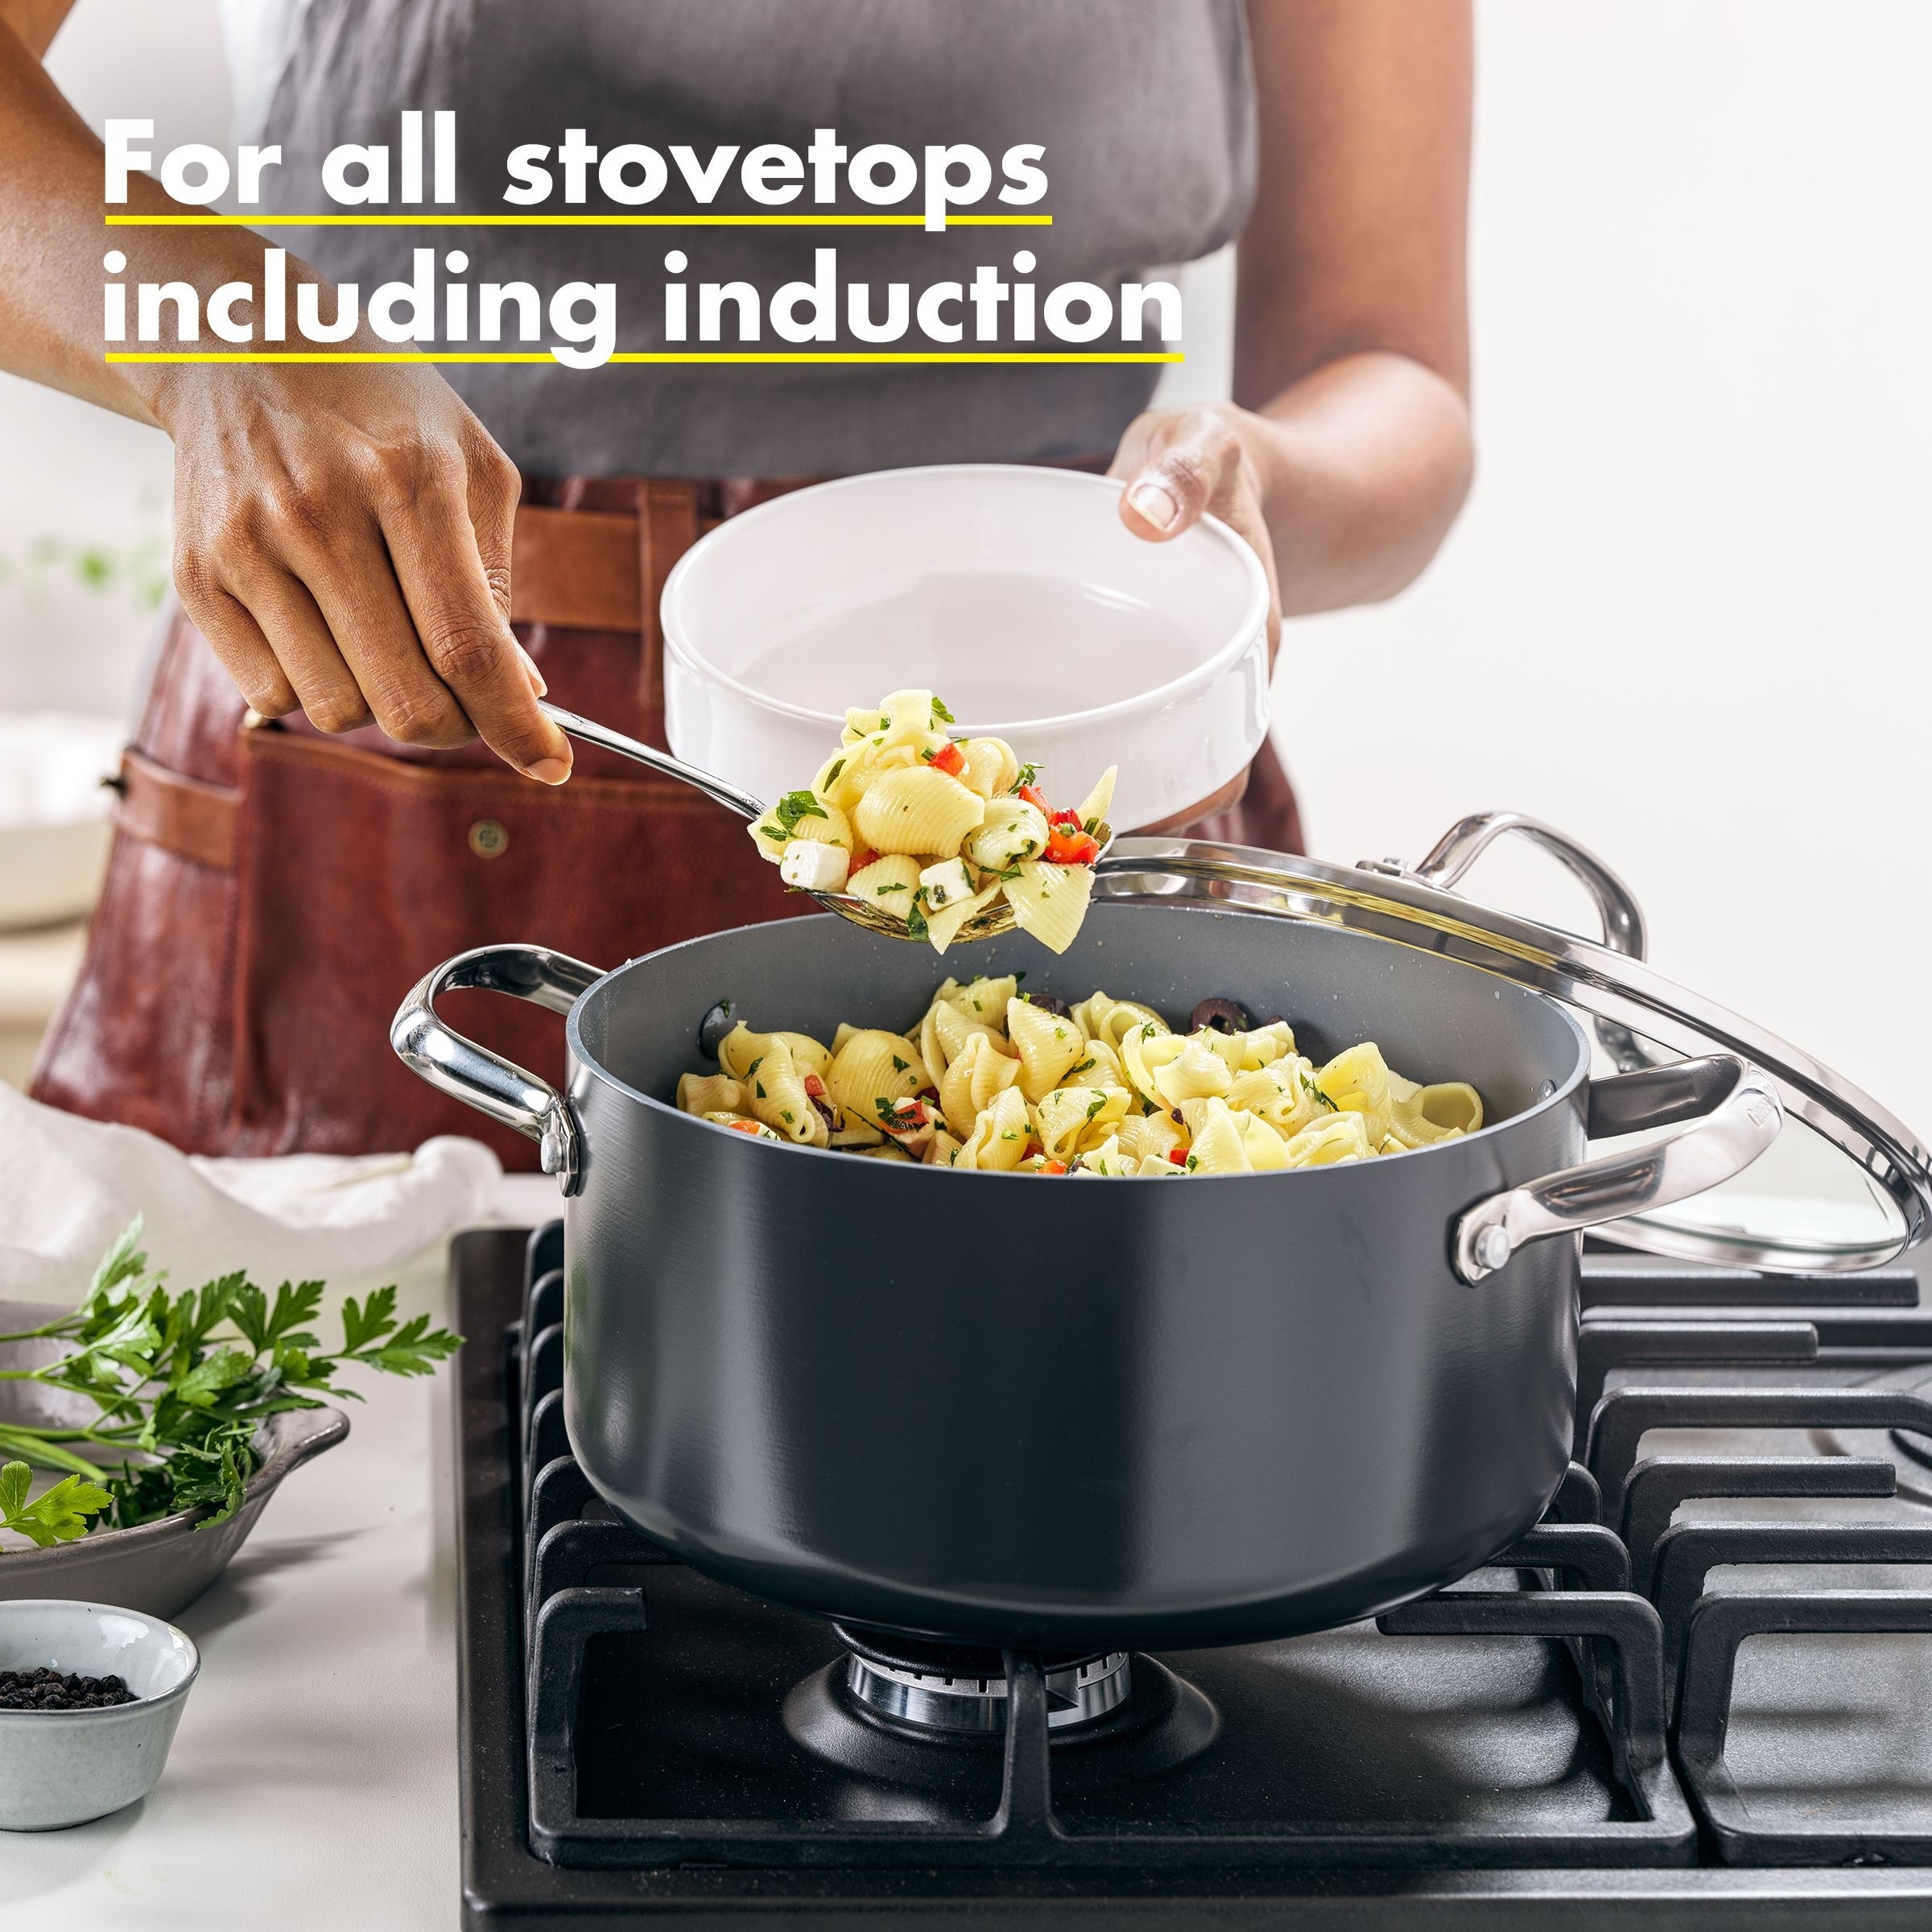 https://ak1.ostkcdn.com/images/products/is/images/direct/a8311212263793562b585218e96bf7a723272de3/GreenPan-Valencia-Pro-Hard-Anodized-Induction-Safe-Healthy-Ceramic-Nonstick-Gray-Casserole-with-Lid%2C-5QT.jpg